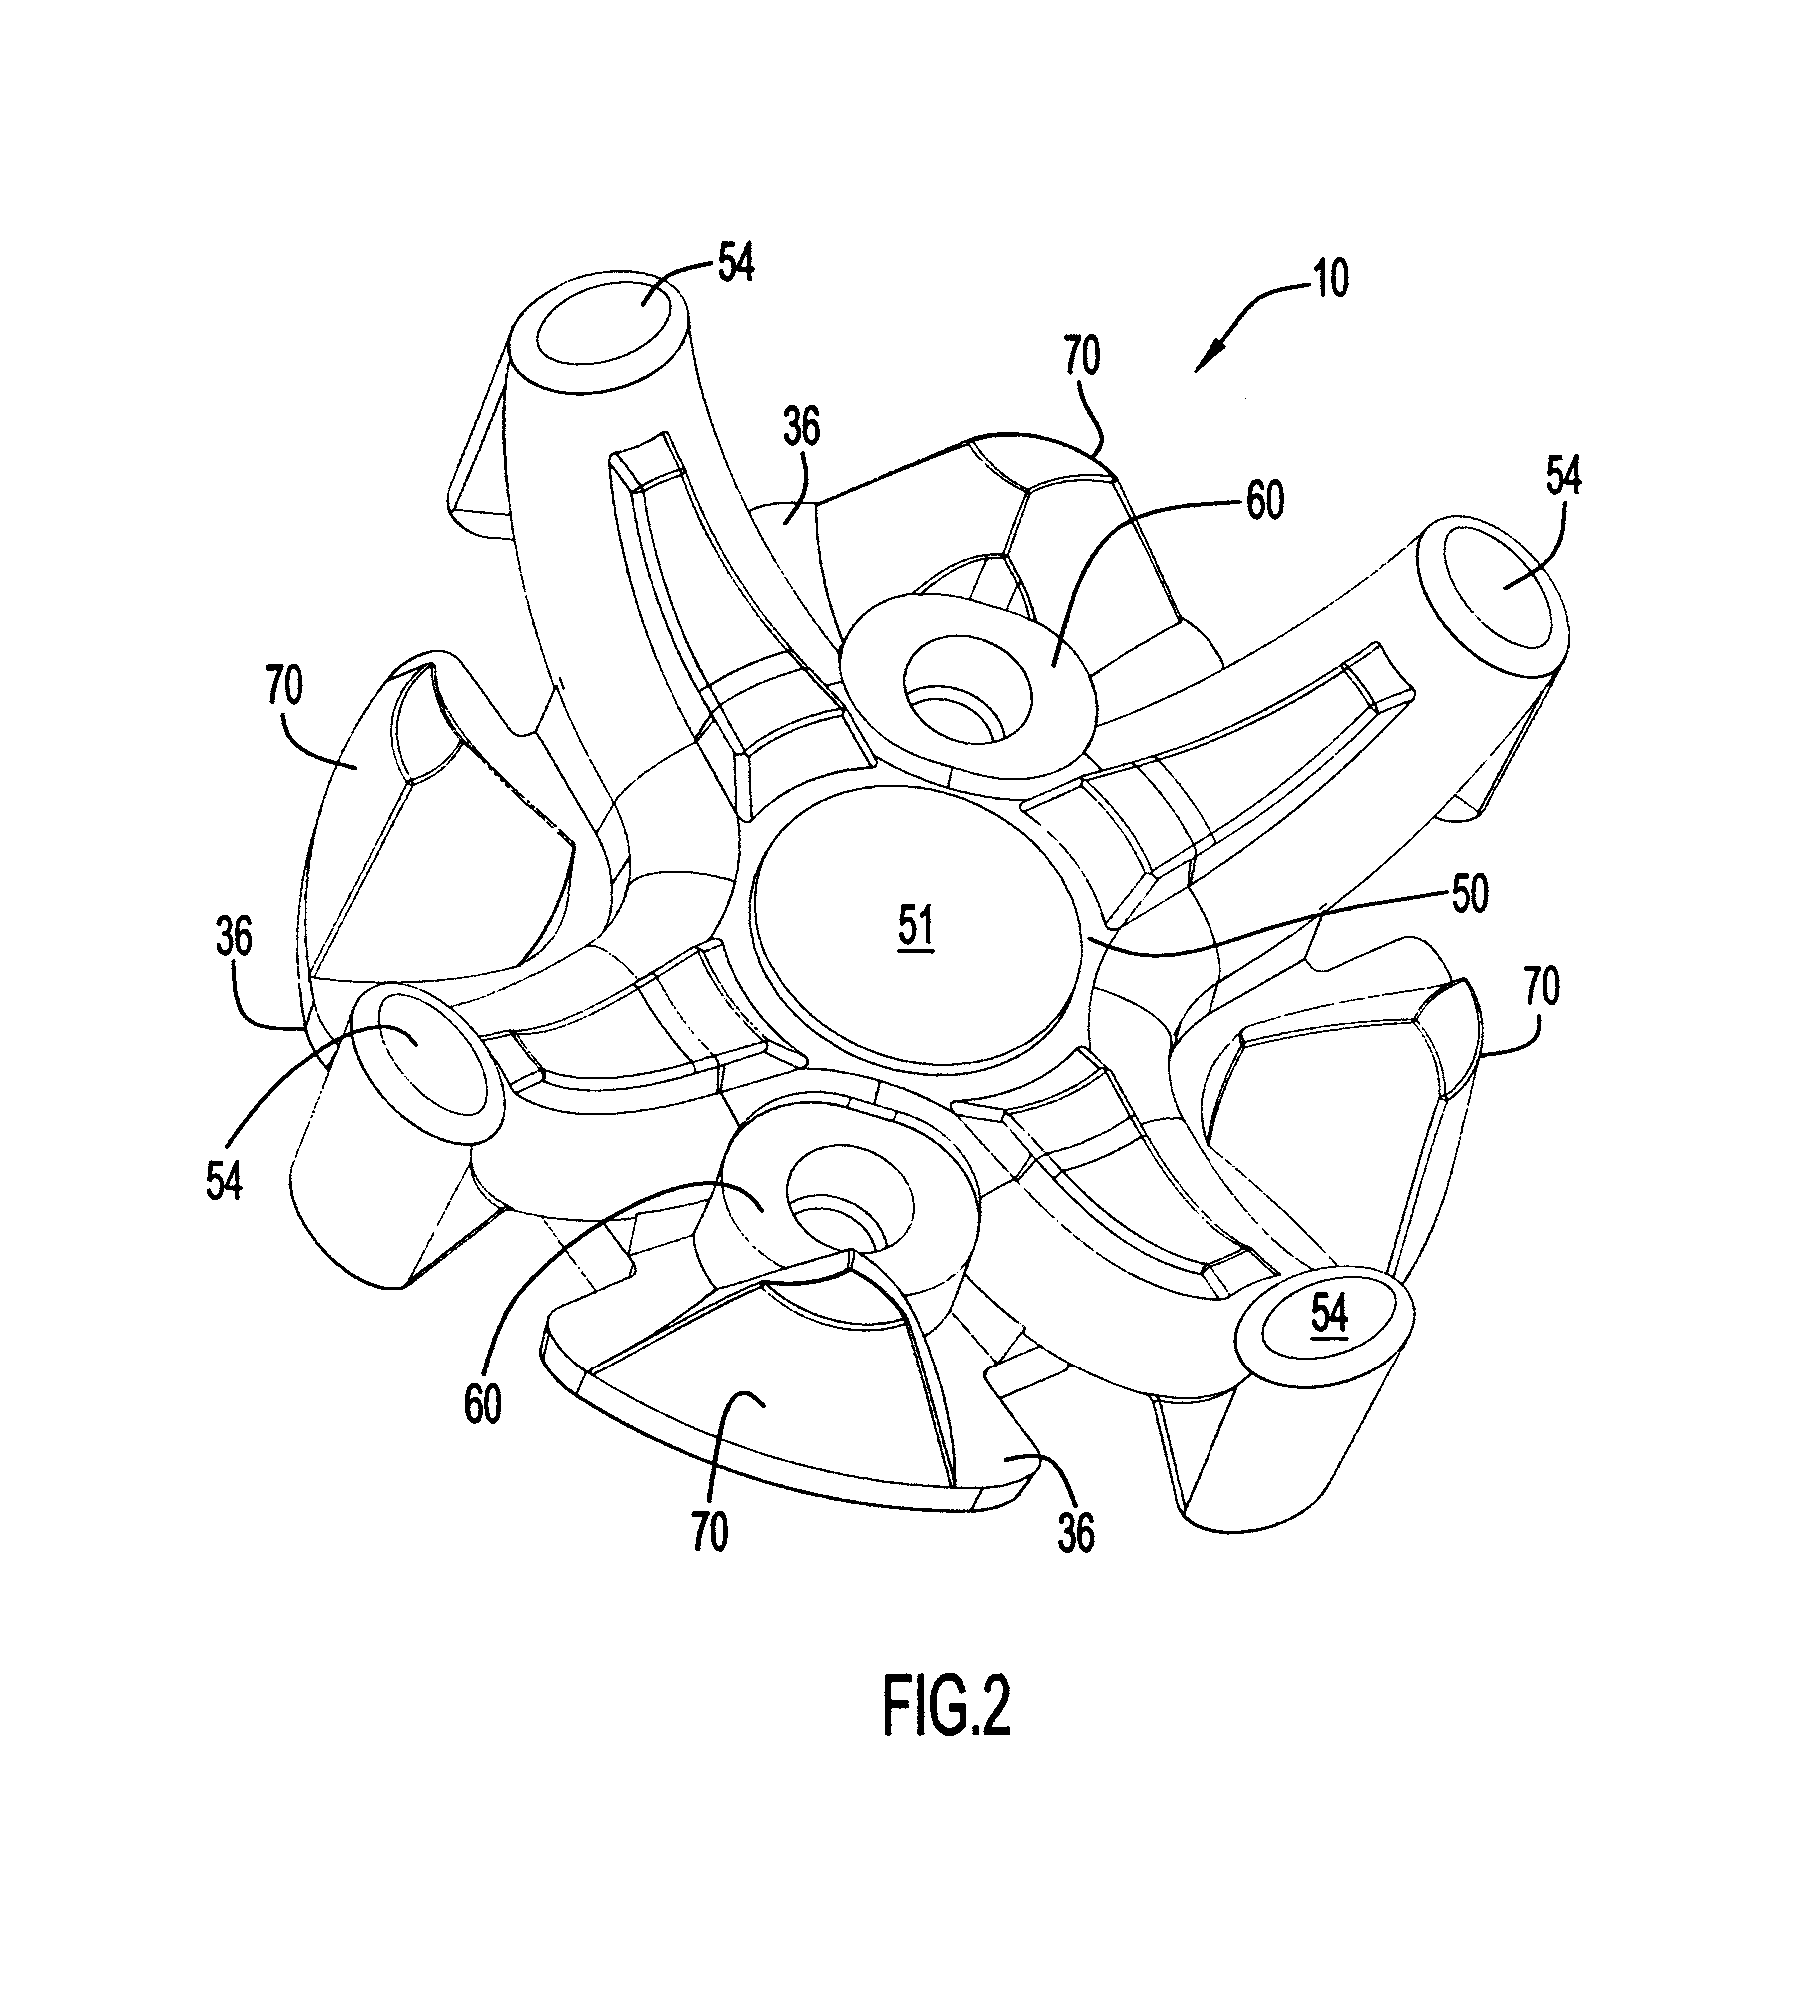 Athletic Shoe Cleat With Dynamic Traction and Method of Making and Using Same